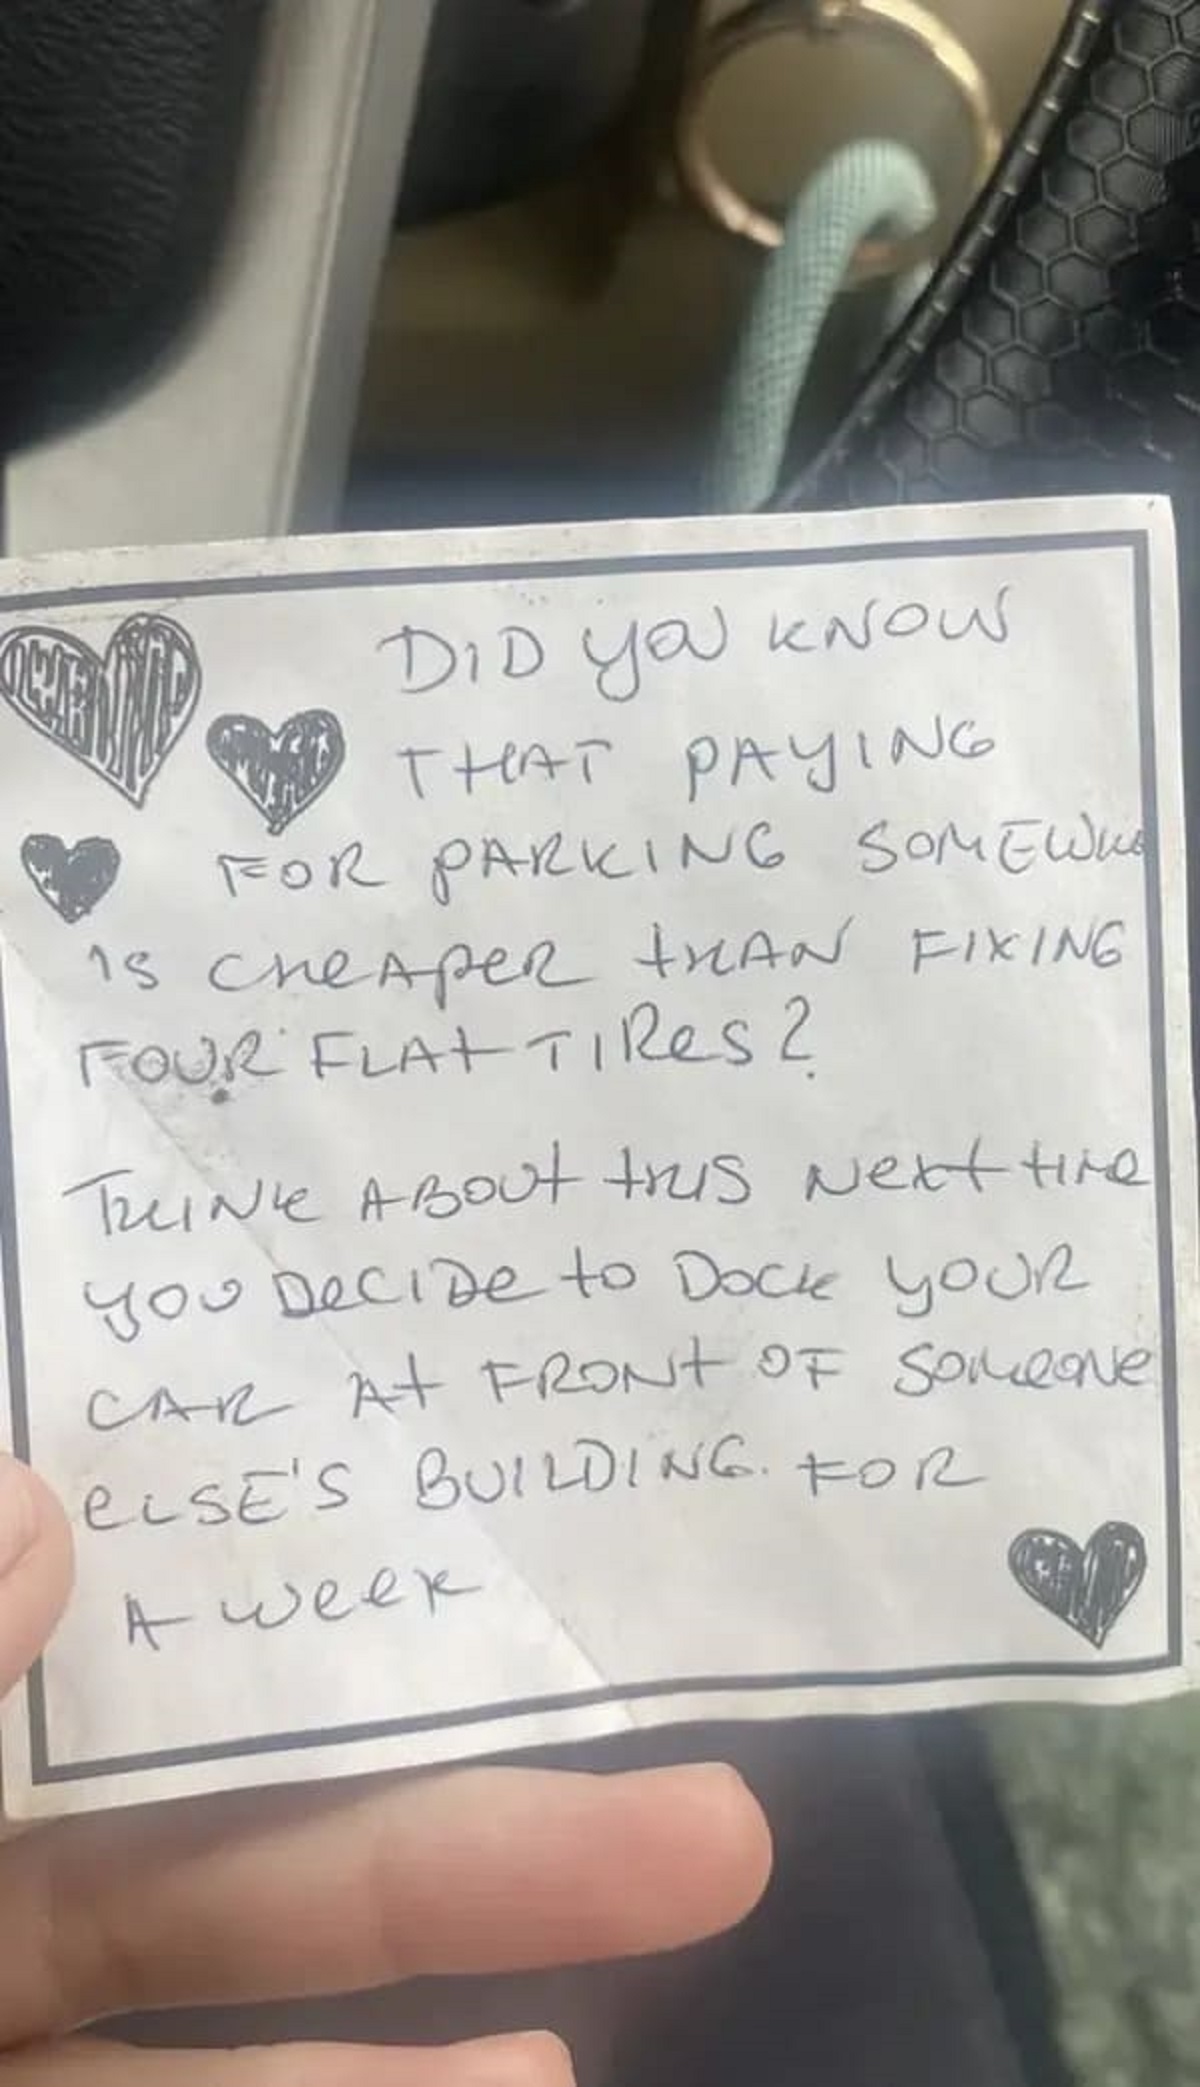 “Went to visit my in-laws for a week. Also, I pay for a street parking pass”